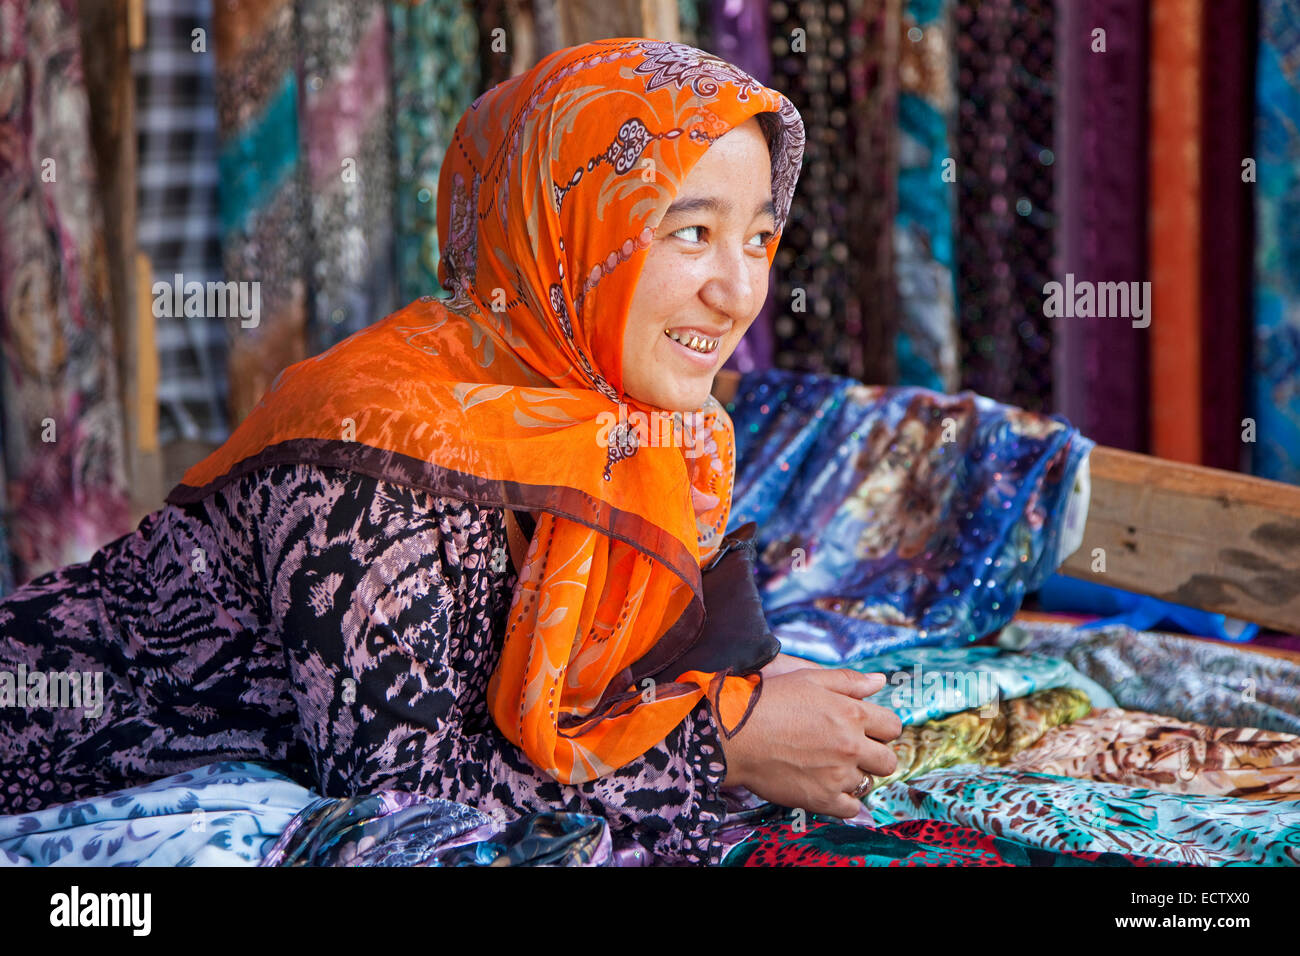 Kyrgyz woman with golden teeth selling colourful fabrics at market in Osh, Kyrgyzstan Stock Photo